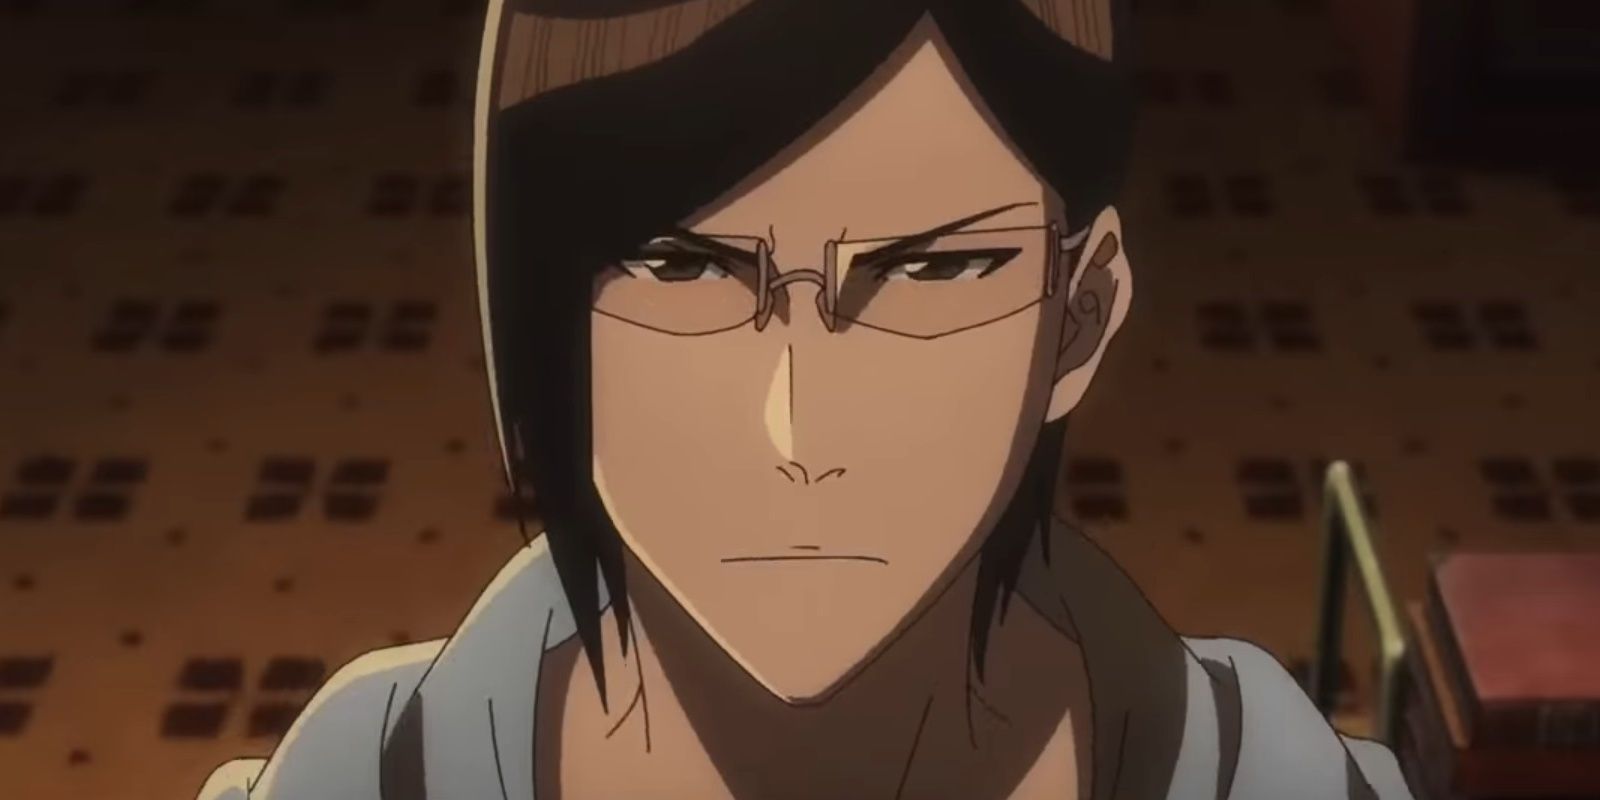 Uryu Ishida in the new Bleach anime wearing glasses and frowning.